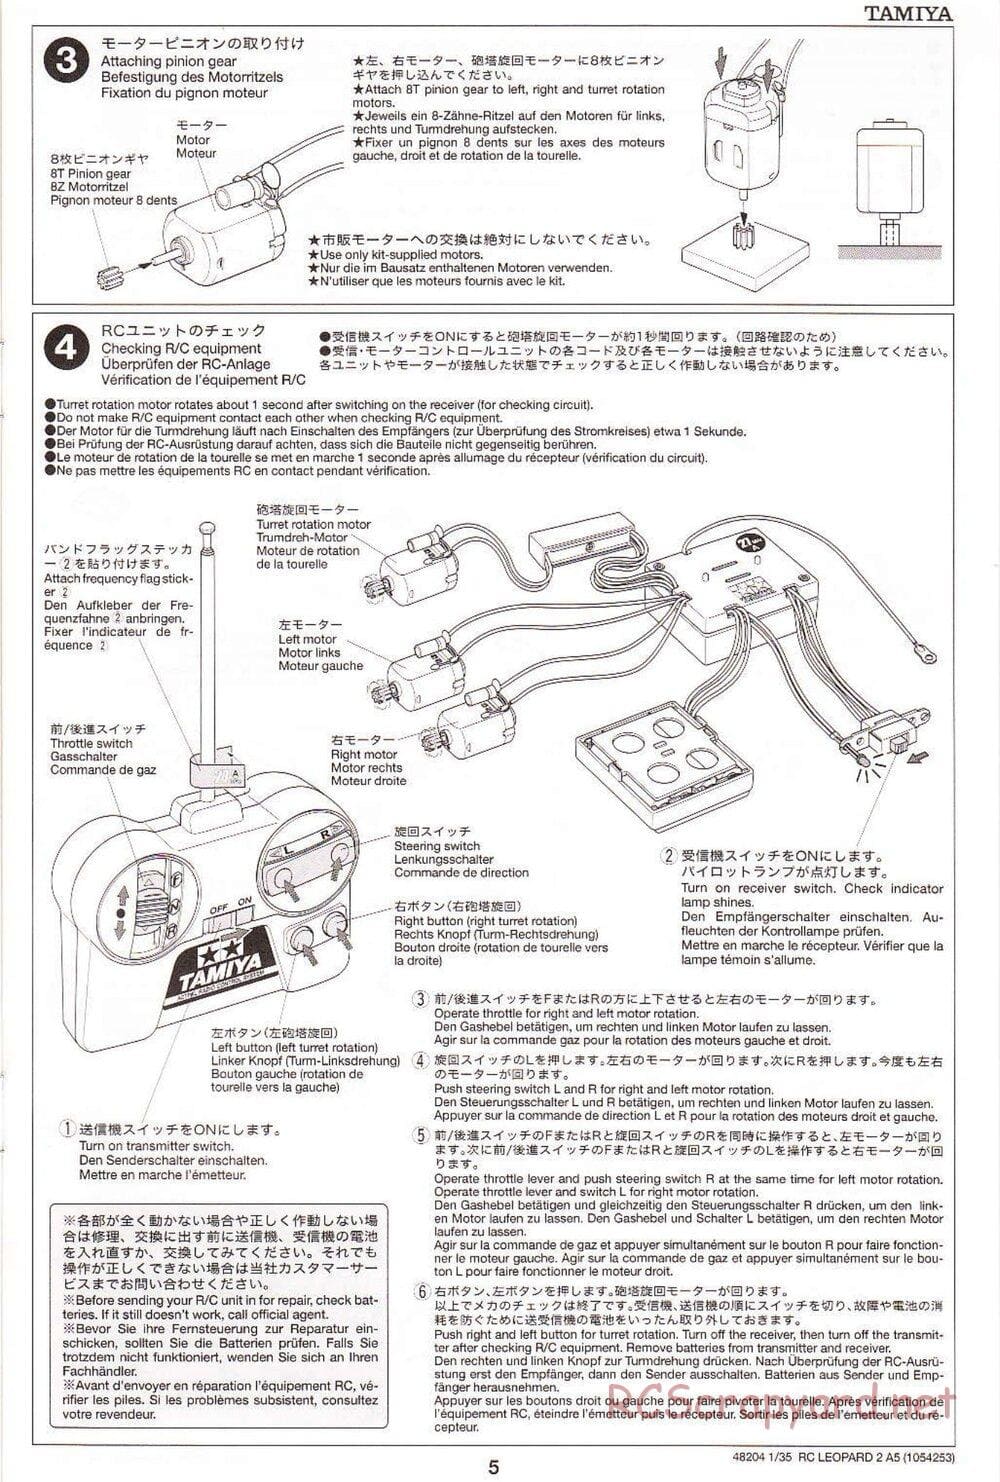 Tamiya - Leopard 2 A5 Main Battle Tank - 1/35 Scale Chassis - Manual - Page 5